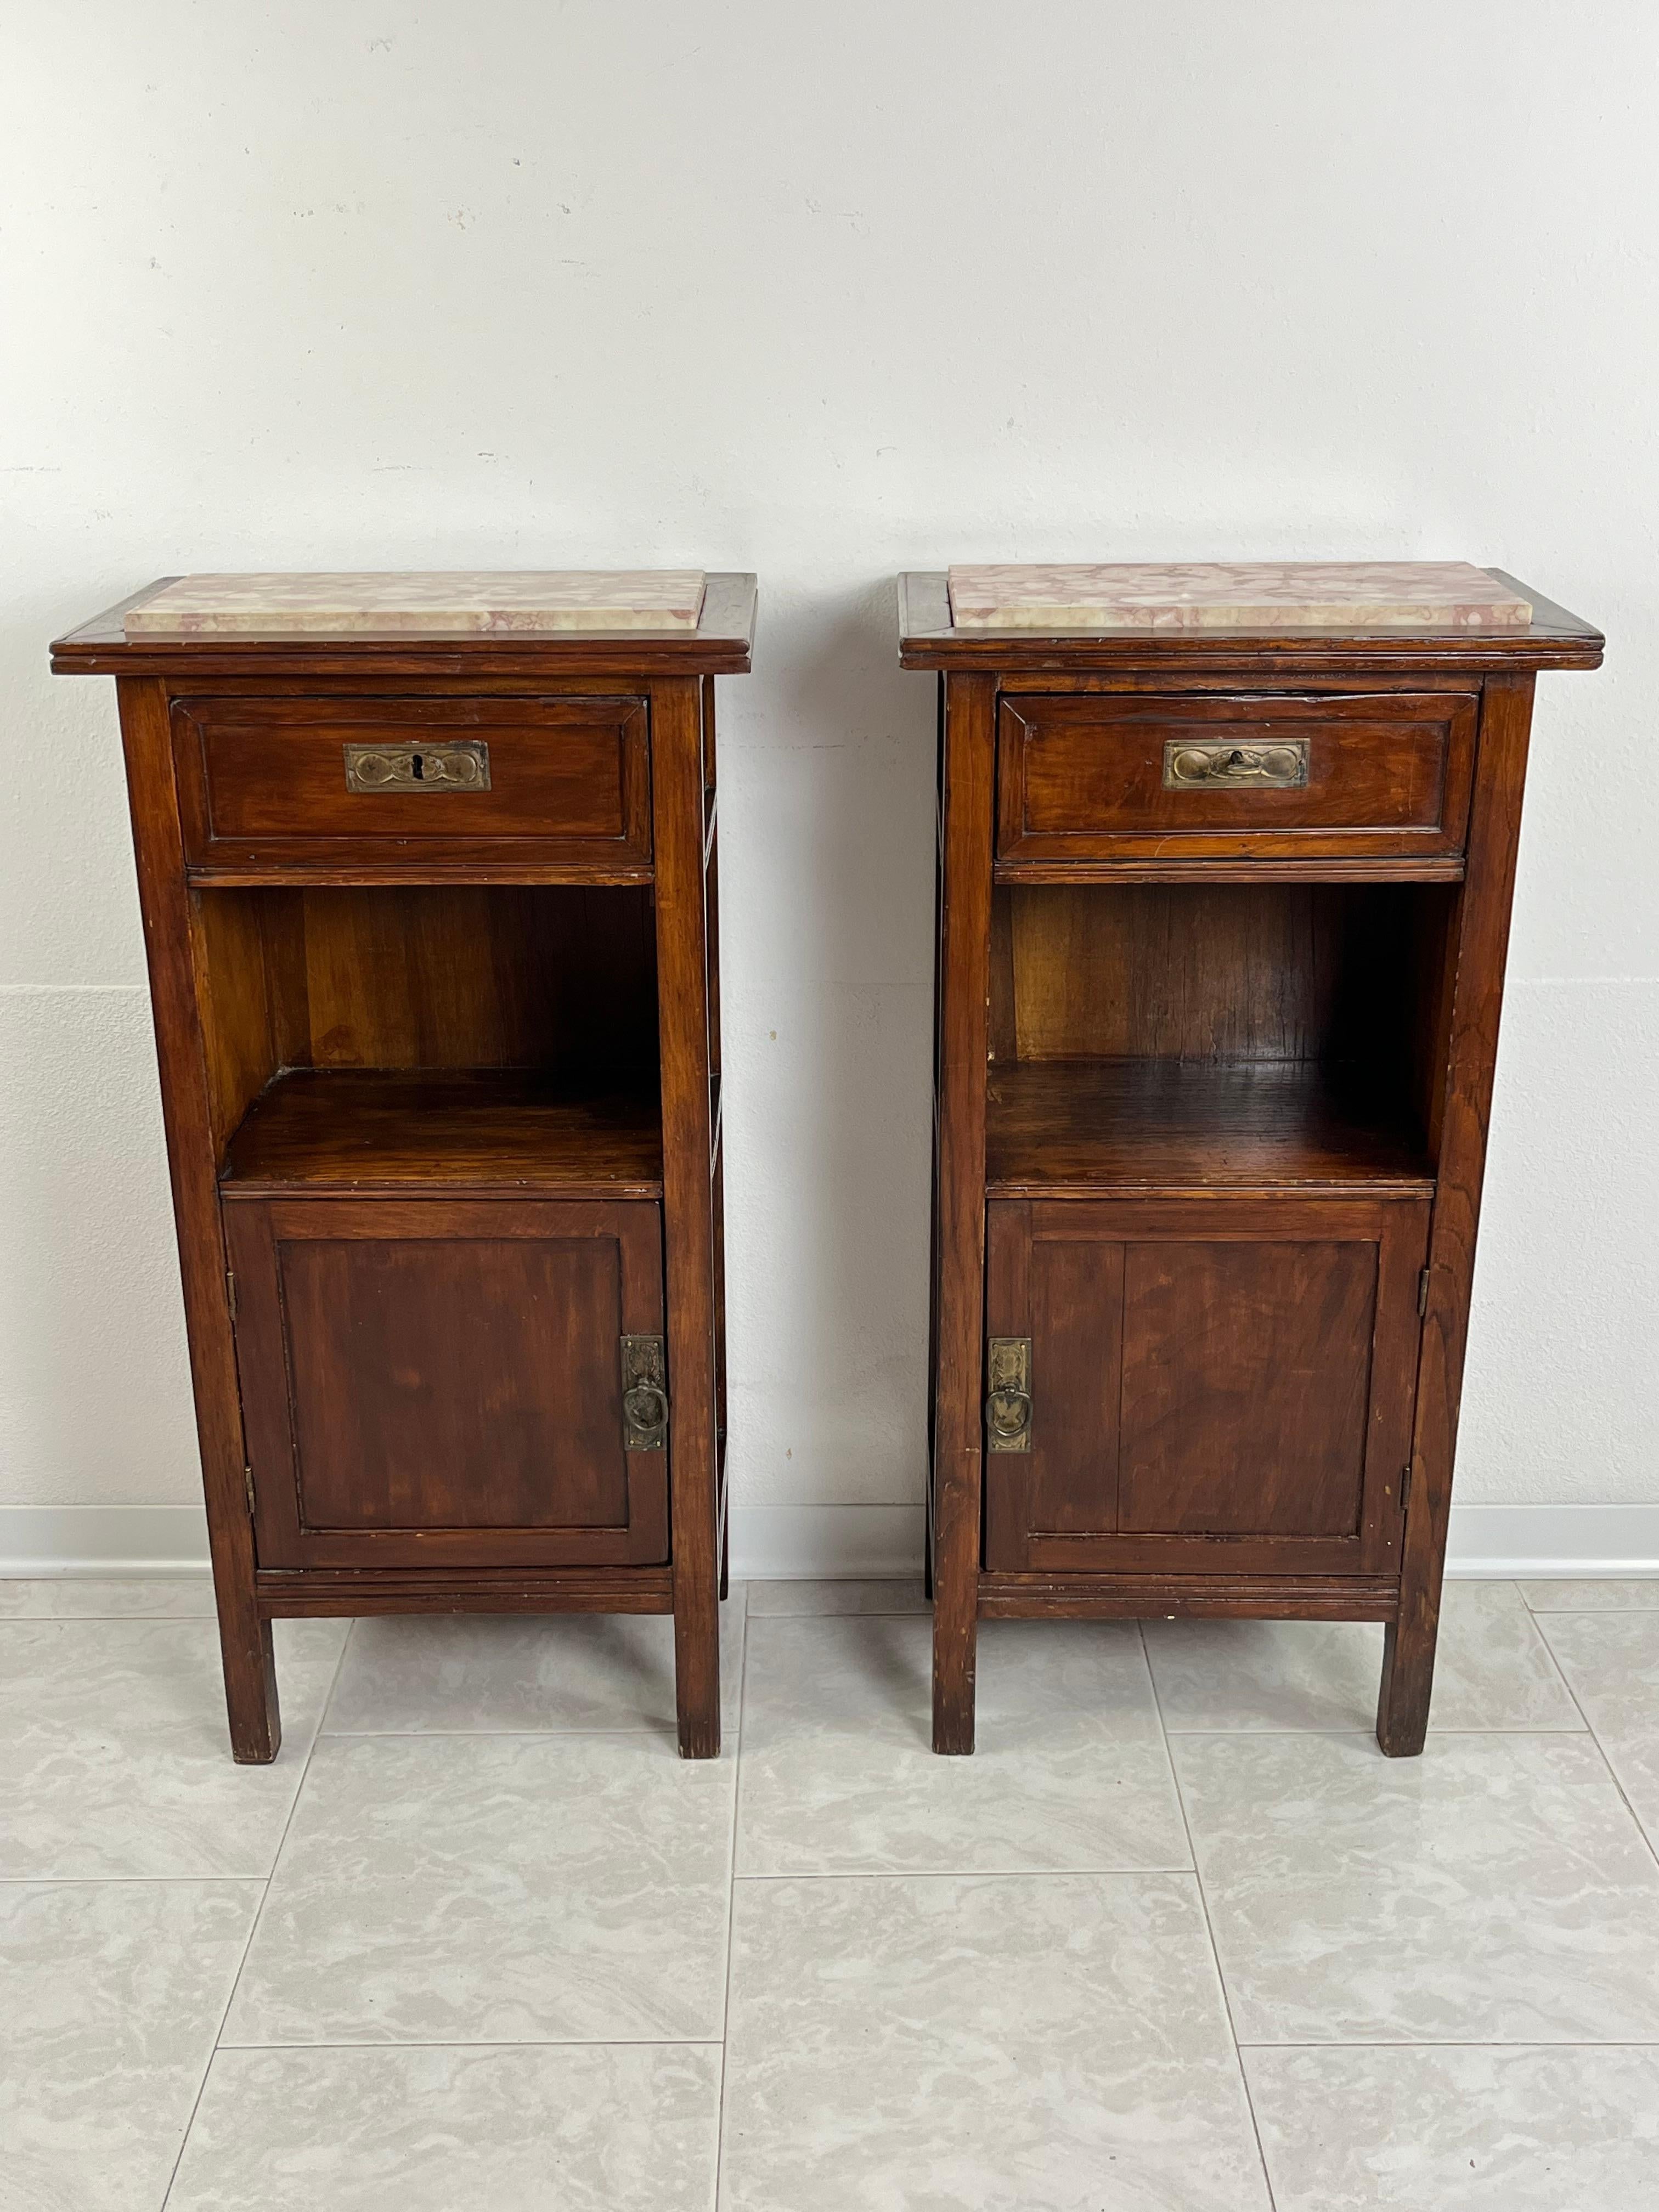 Set of 2 Mid-Century Sicilian wood and marble bedside tables 1930s.
Found in a nobleman's villa.
Good condition, small signs of aging.

We guarantee adequate packaging and will ship via DHL, insuring the contents against any breakage or loss of the